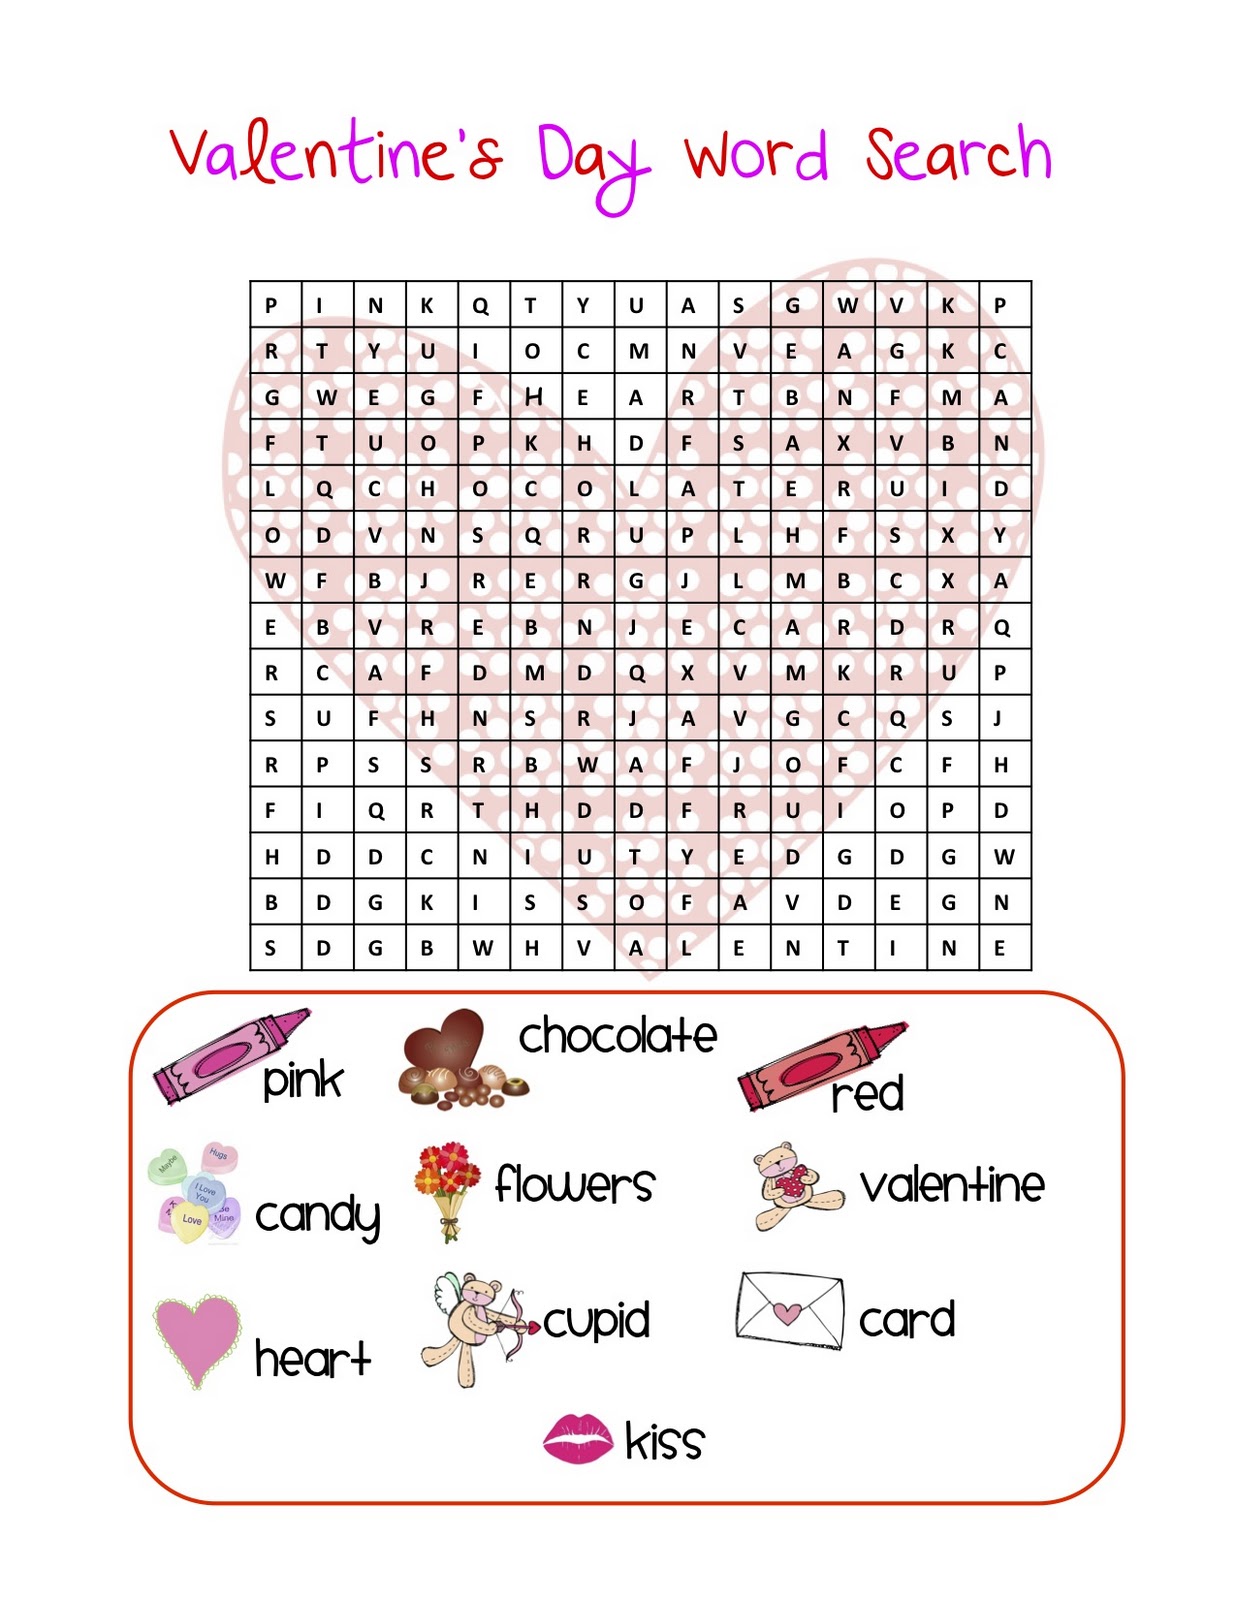 Classroom Freebies: Valentine's Day Word Search!!!